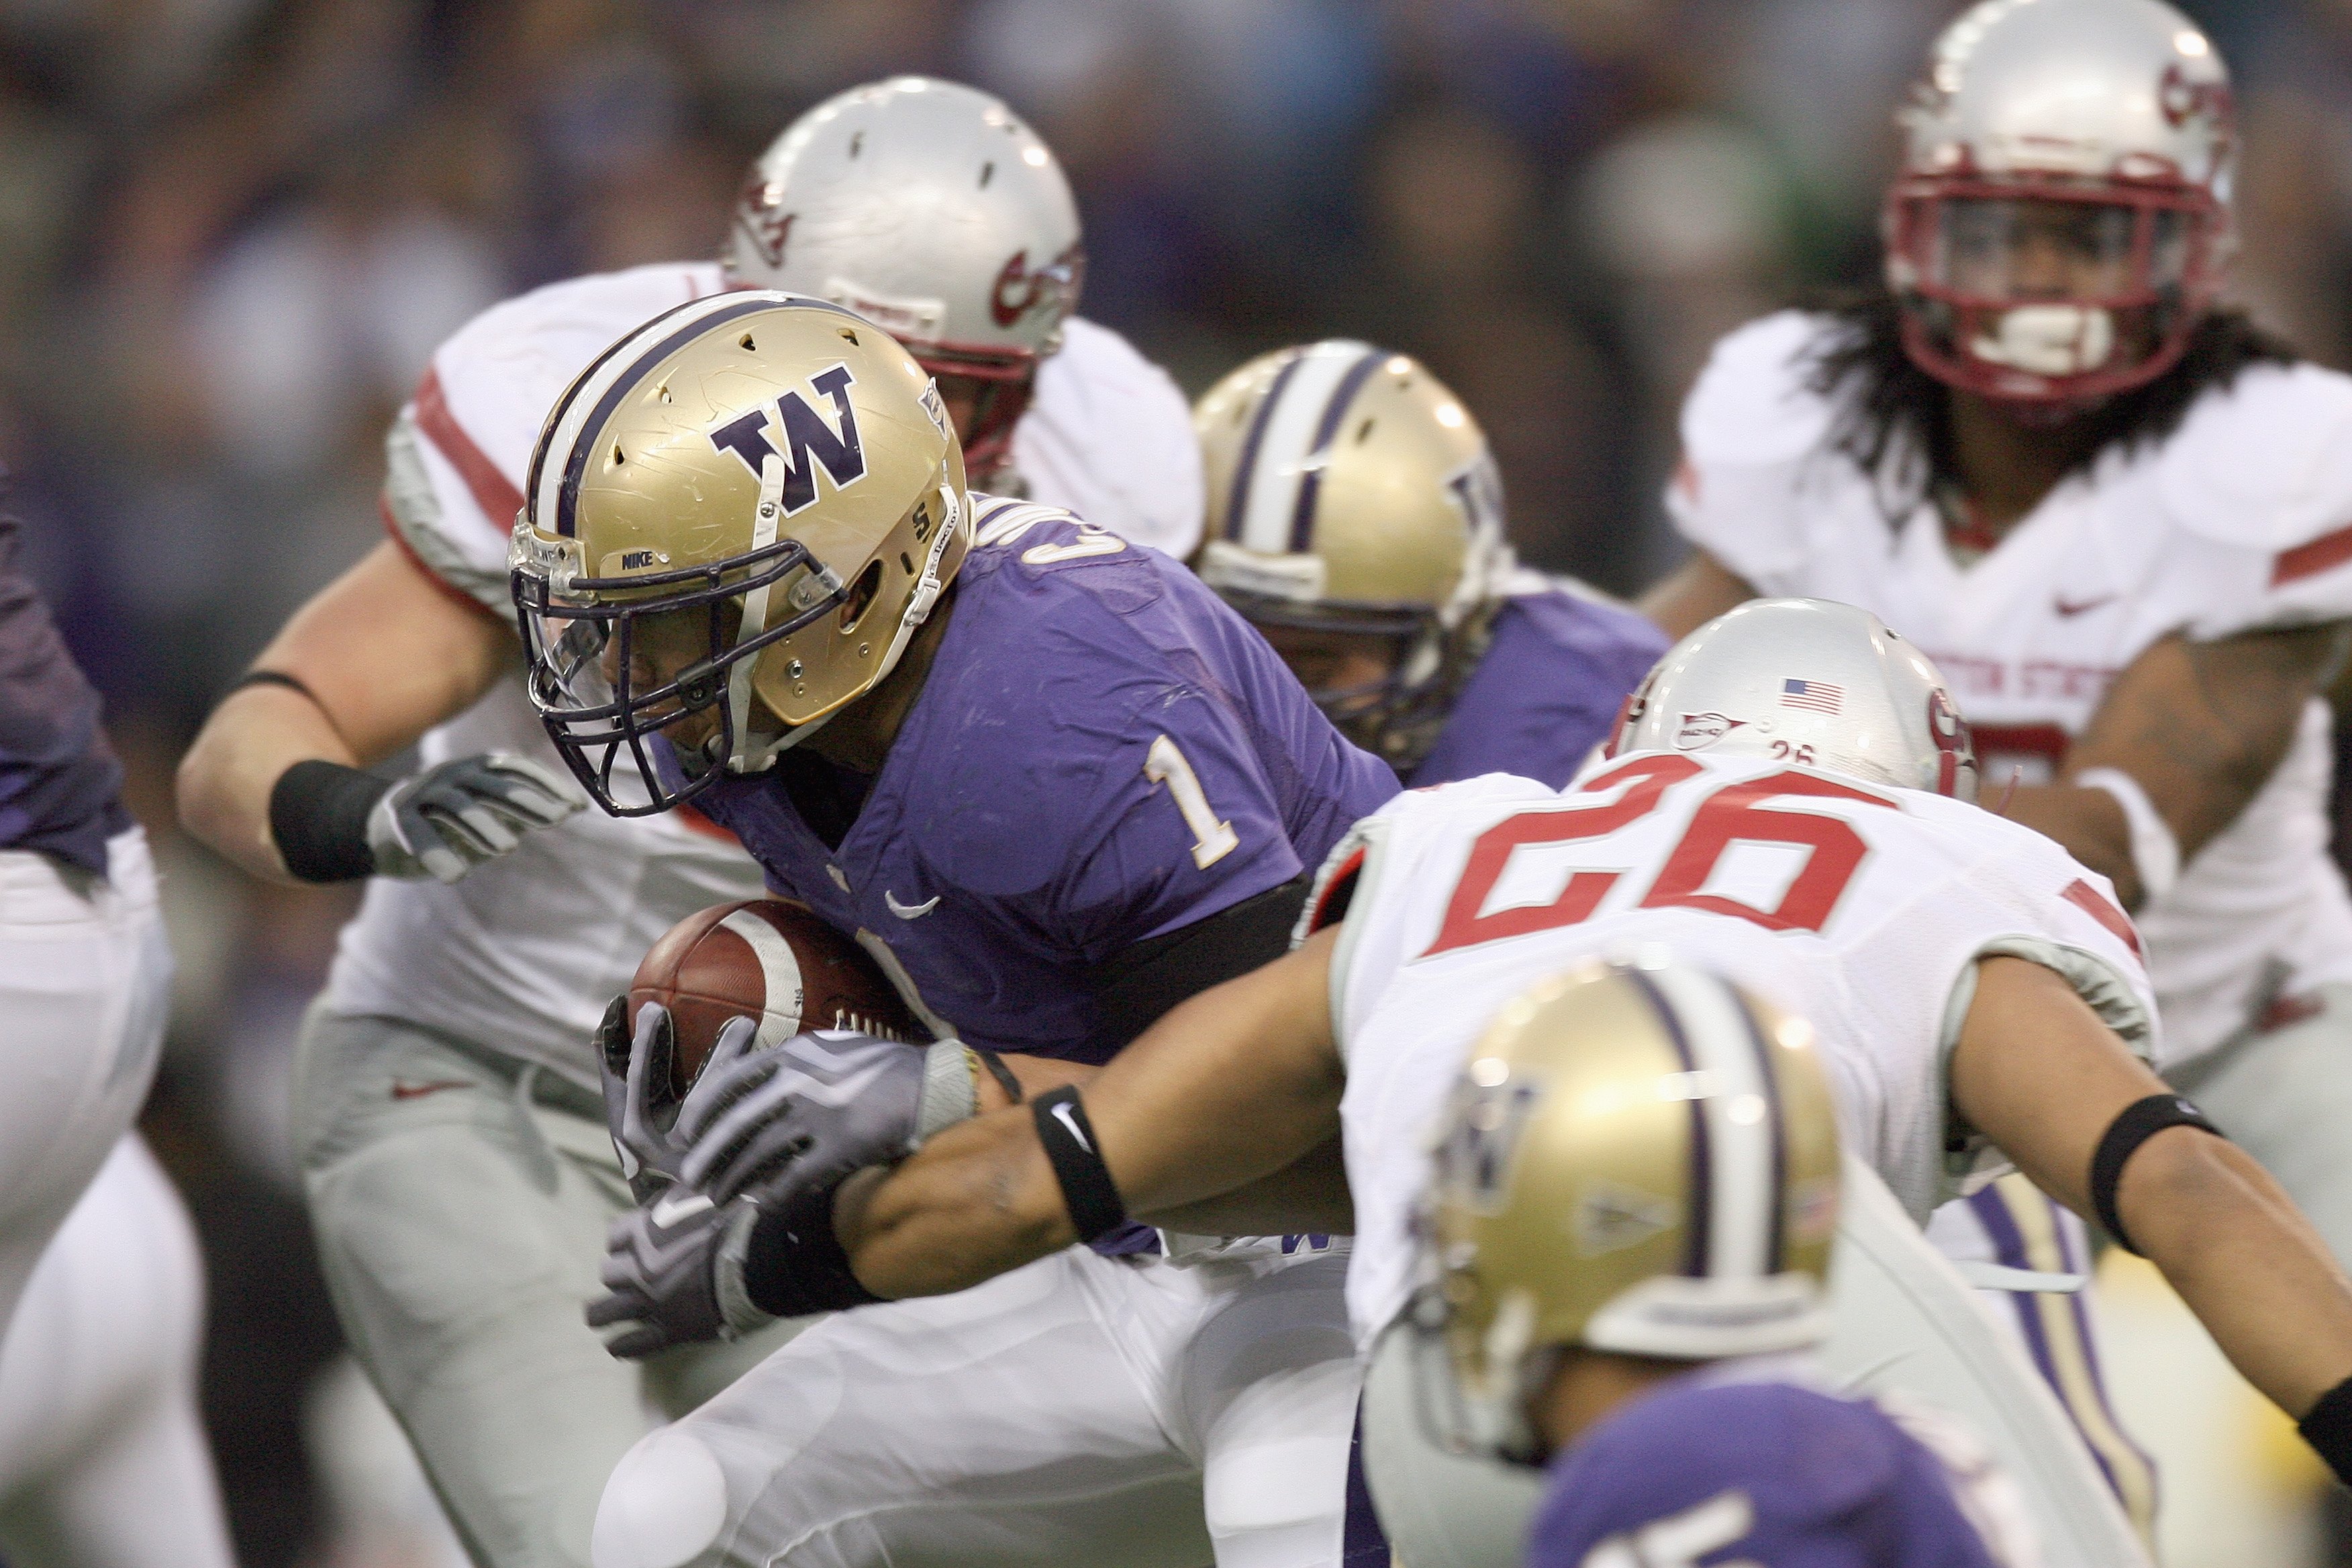 SEATTLE - NOVEMBER 28: Chris Polk #1 of the Washington Huskies carries the ball during the Apple Cup game against the Washington State Cougars on November 28, 2009 at Husky Stadium in Seattle, Washington. The Huskies defeated the Cougars 30-0. (Photo by O